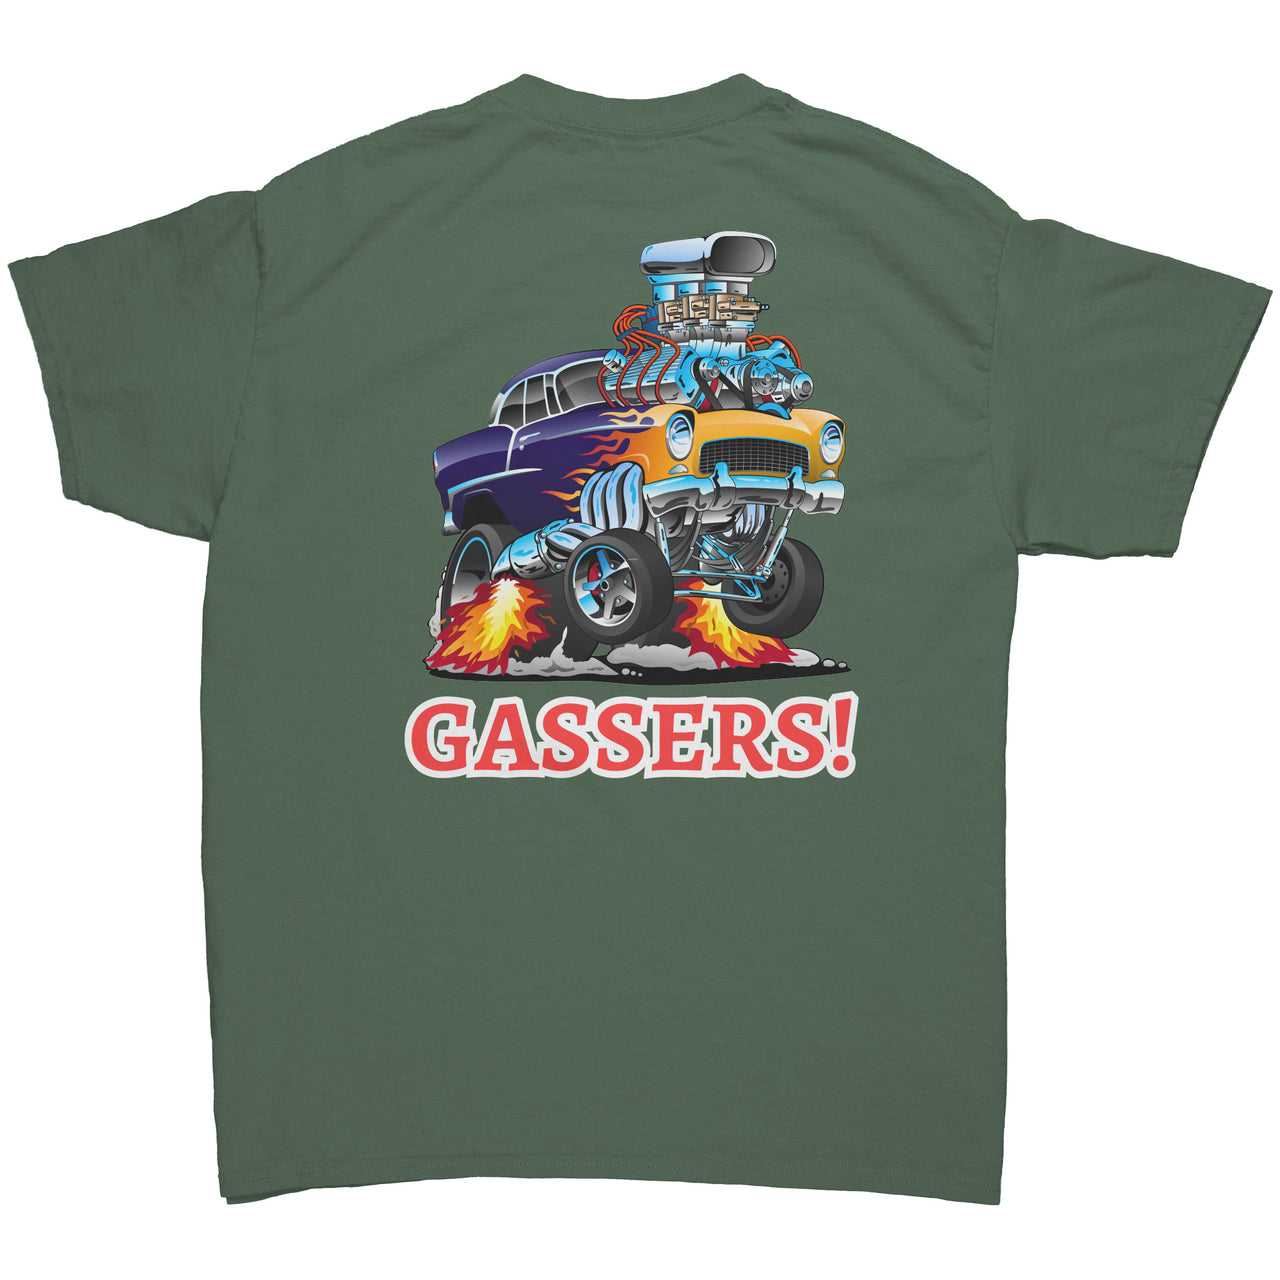 Gassers Men's T-Shirt Image On The Back